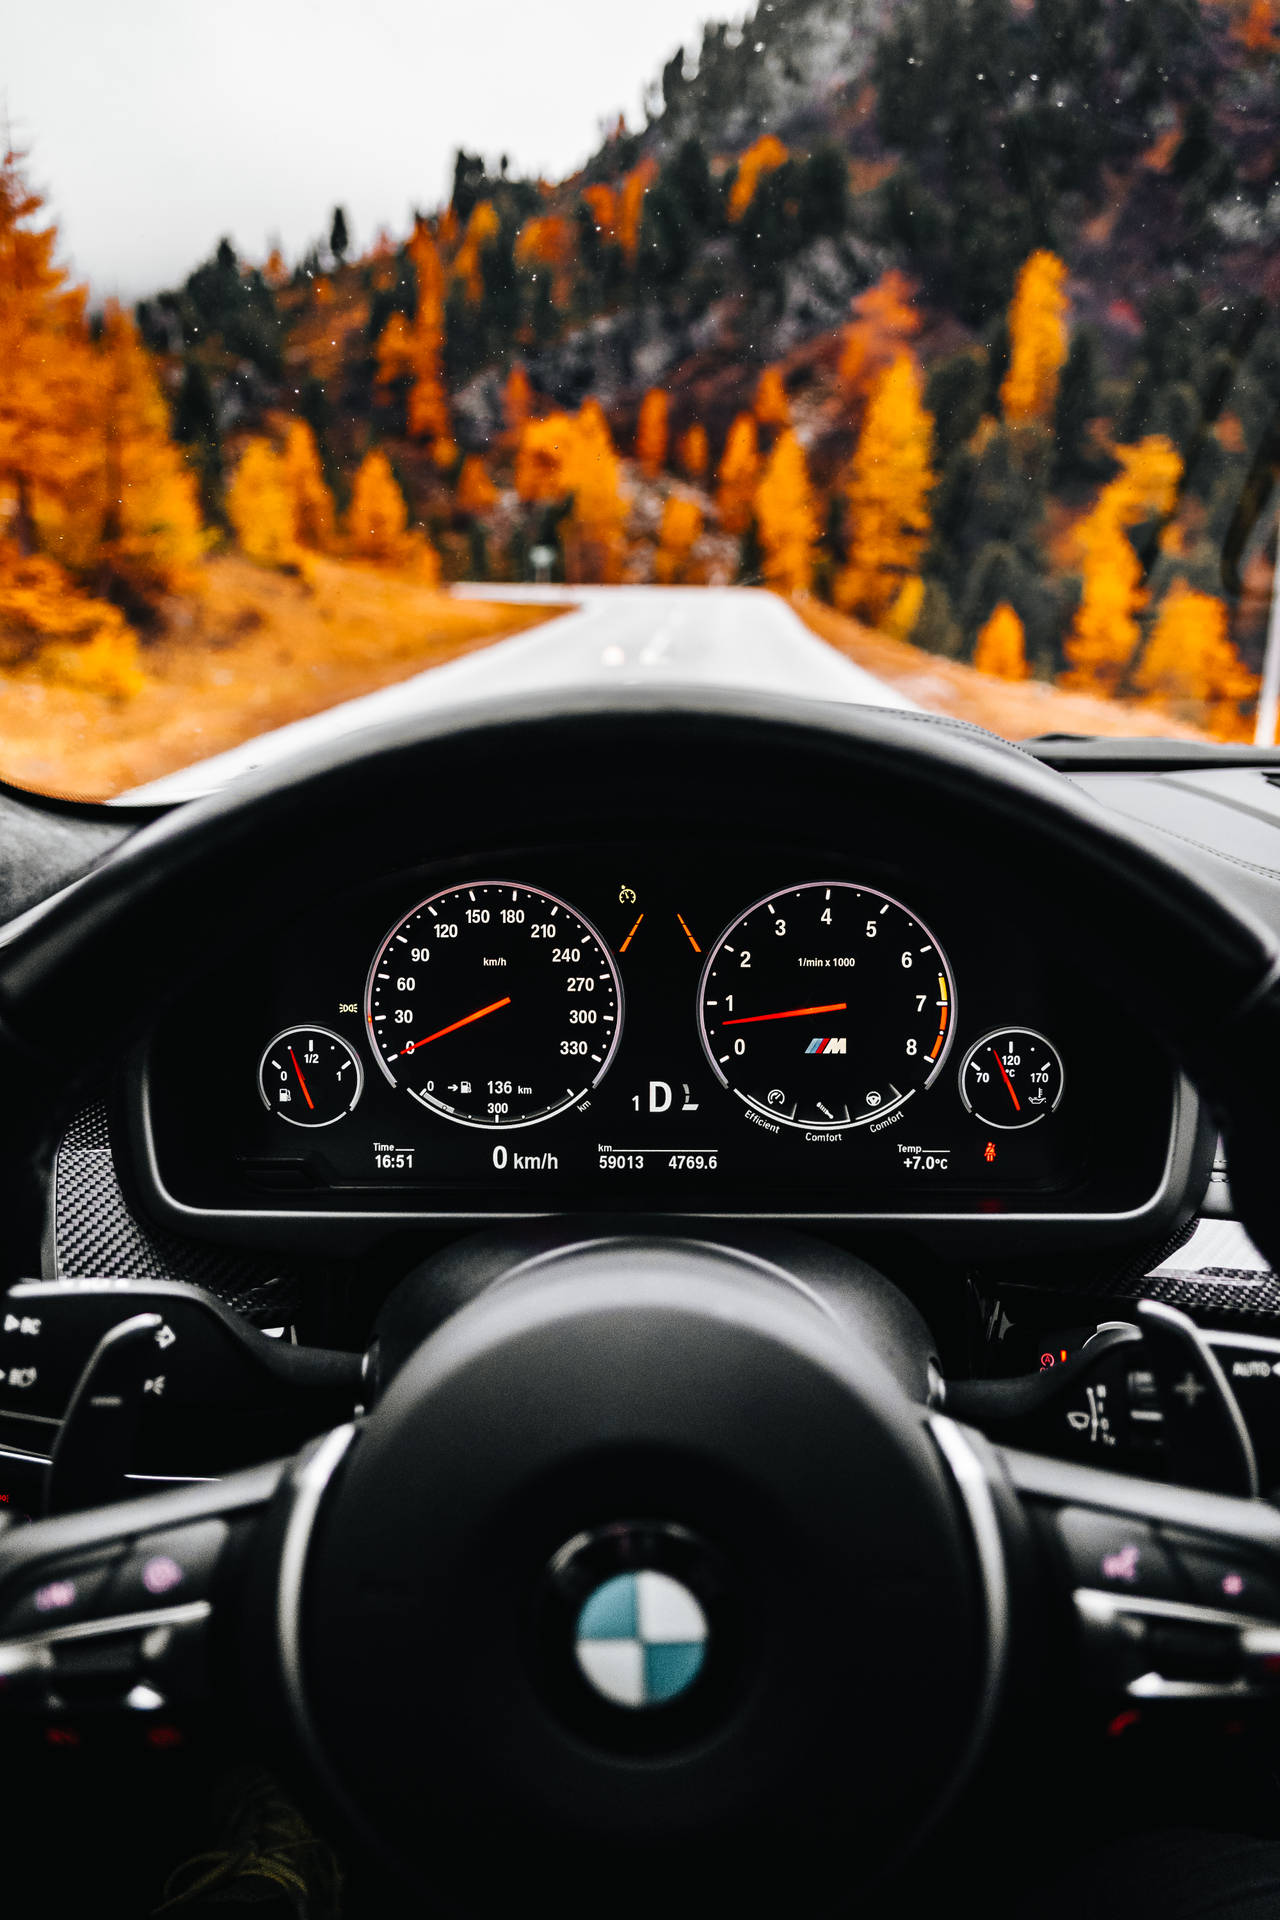 Car Dashboard Display Pictures | Download Free Images on Unsplash